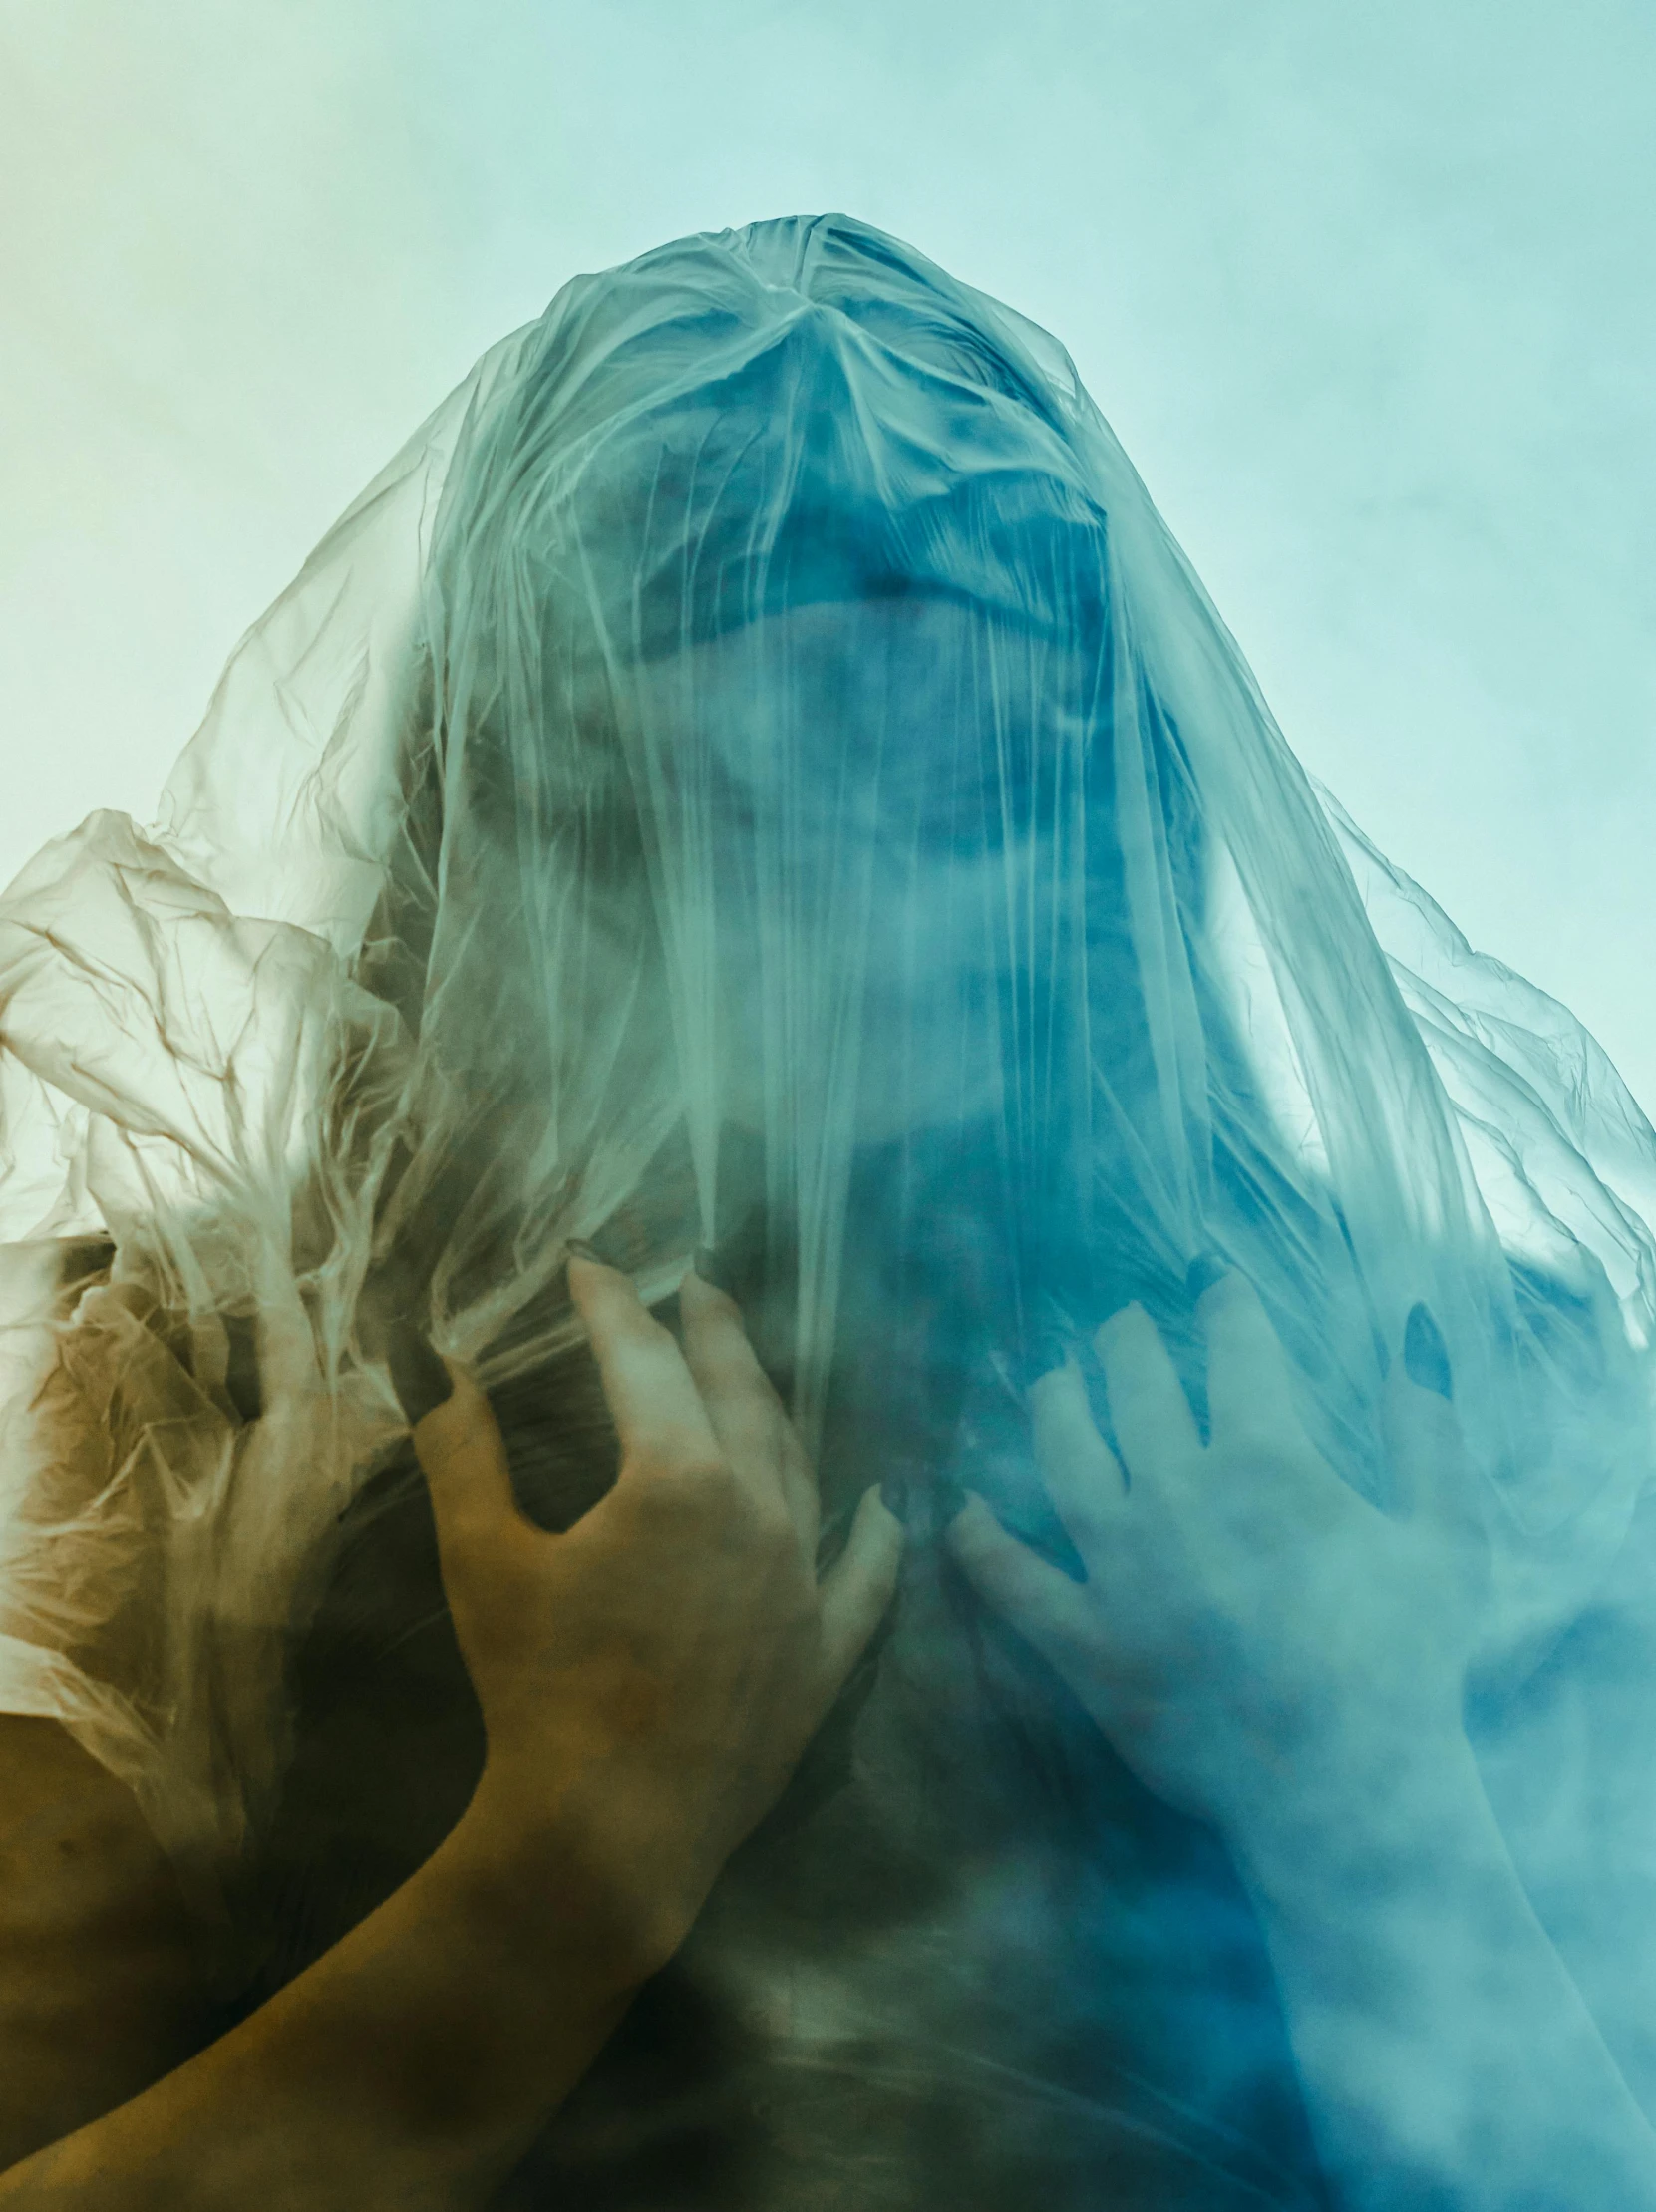 a woman with a veil covering her face, an album cover, inspired by Elsa Bleda, unsplash, surrealism, acid color smoke, woman holding another woman, ghosts, raziel irl